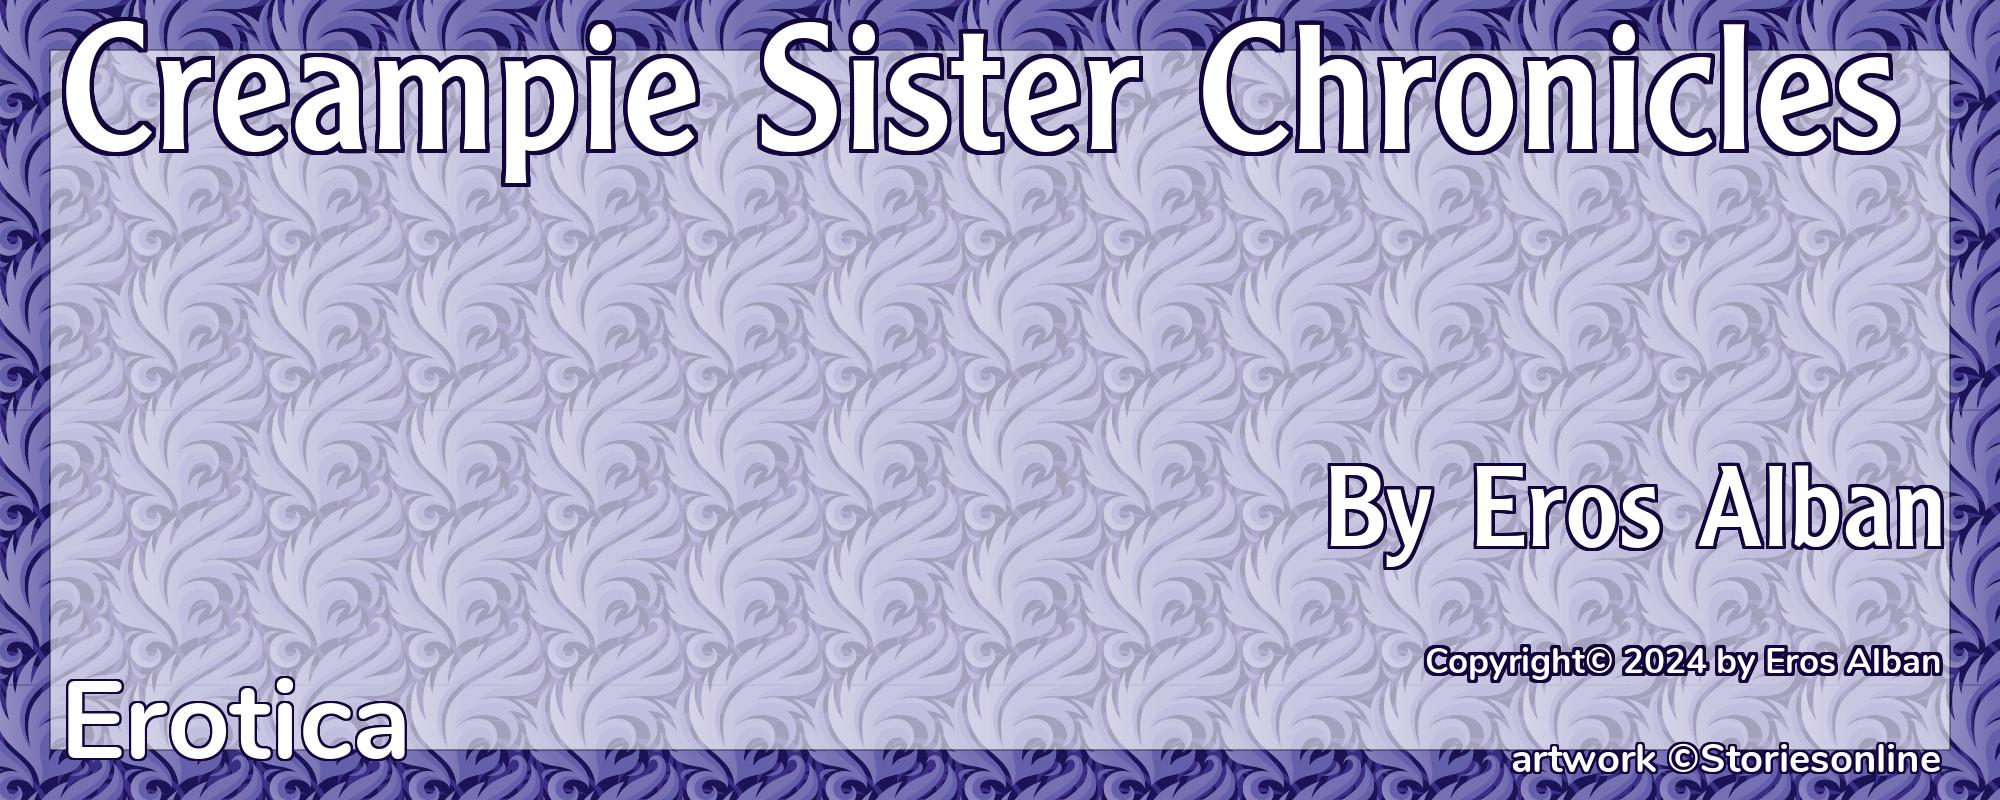 Creampie Sister Chronicles - Cover